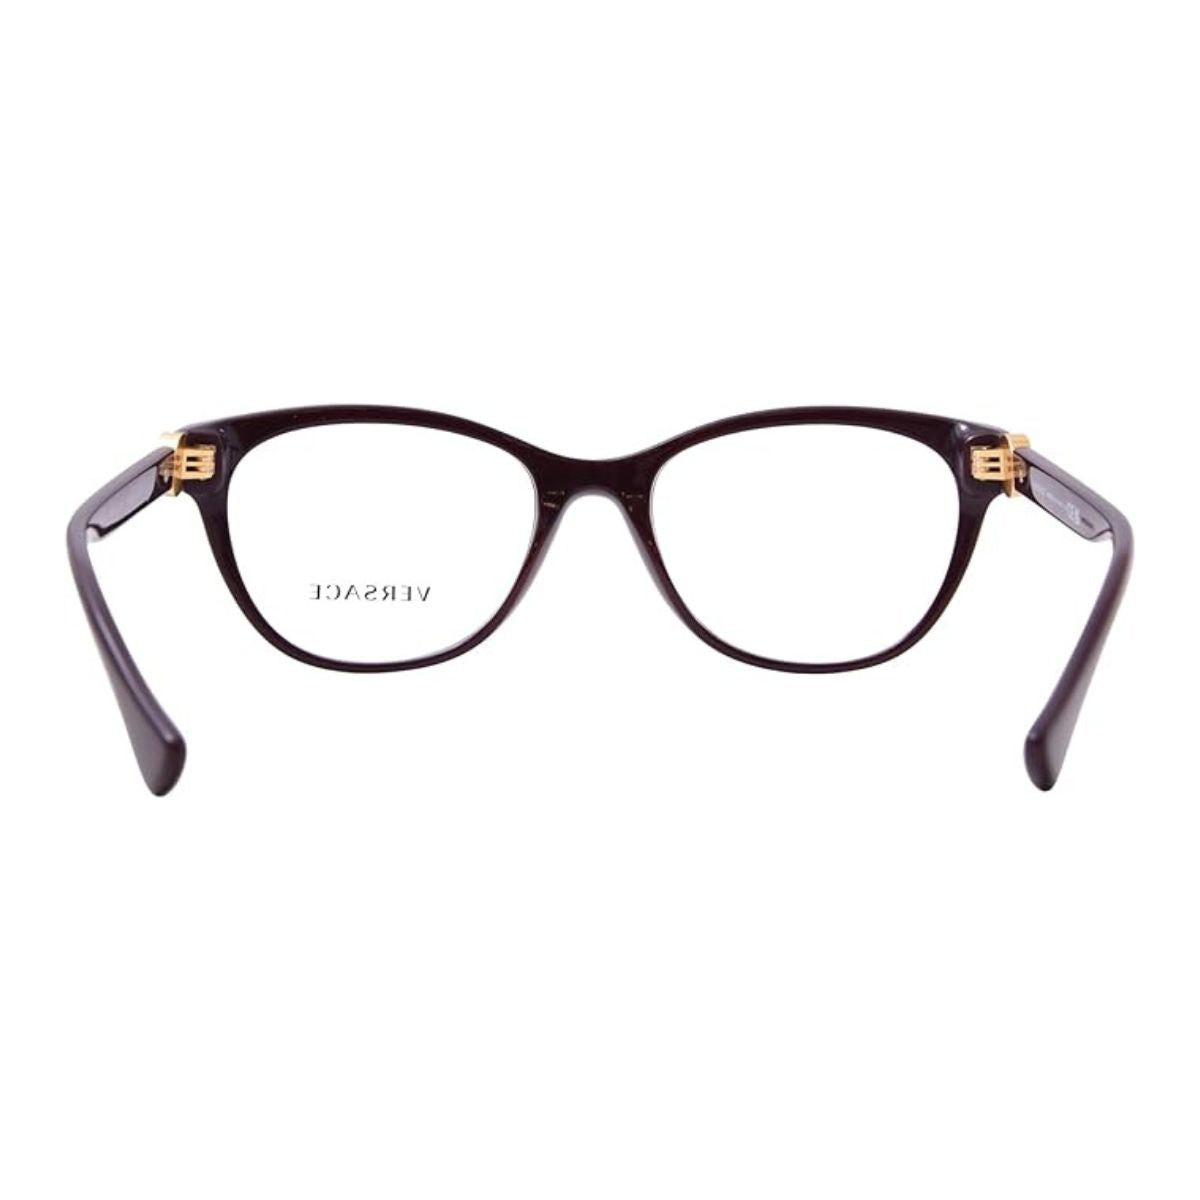 "Best Versace 3330 5386 Optical Frame For Women's Online In India At Optorium"